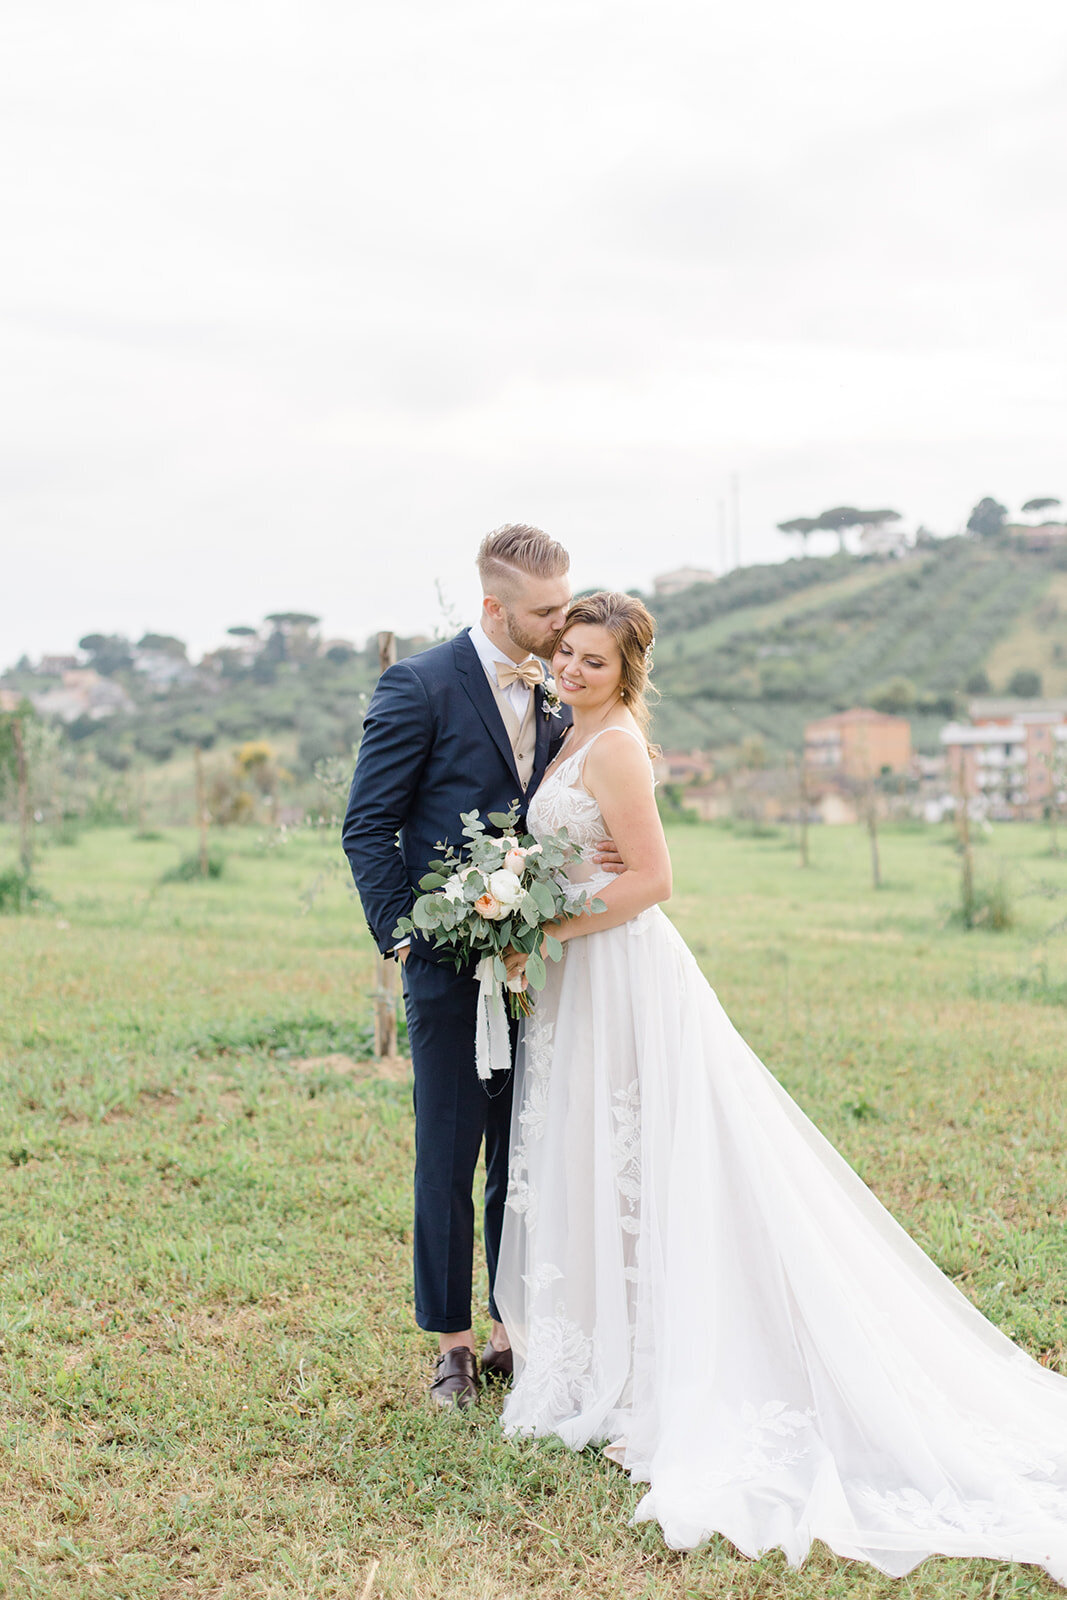 Rome_Italy_Wedding_BrittanyNavinPhotography-690